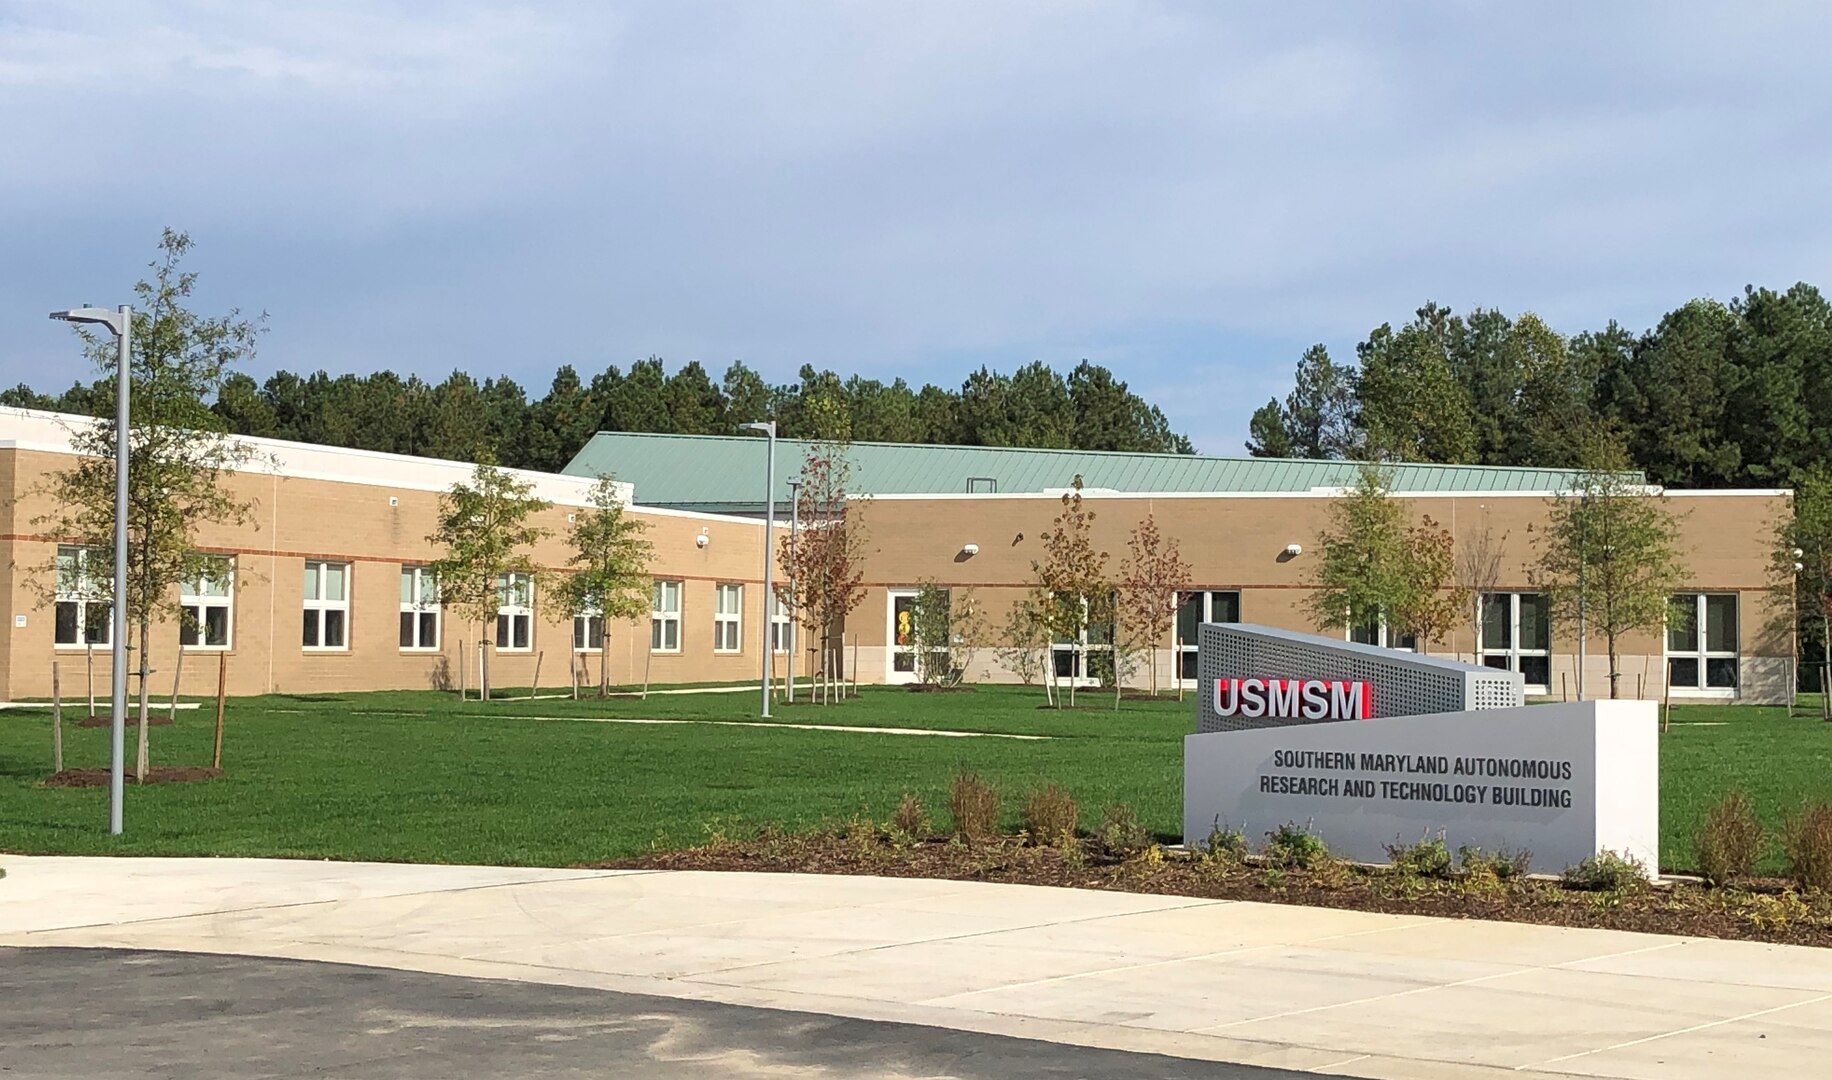 IMAGE: The new Southern Maryland Autonomous Research and Technology Building is the newest addition to the University System of Maryland at Southern Maryland campus.